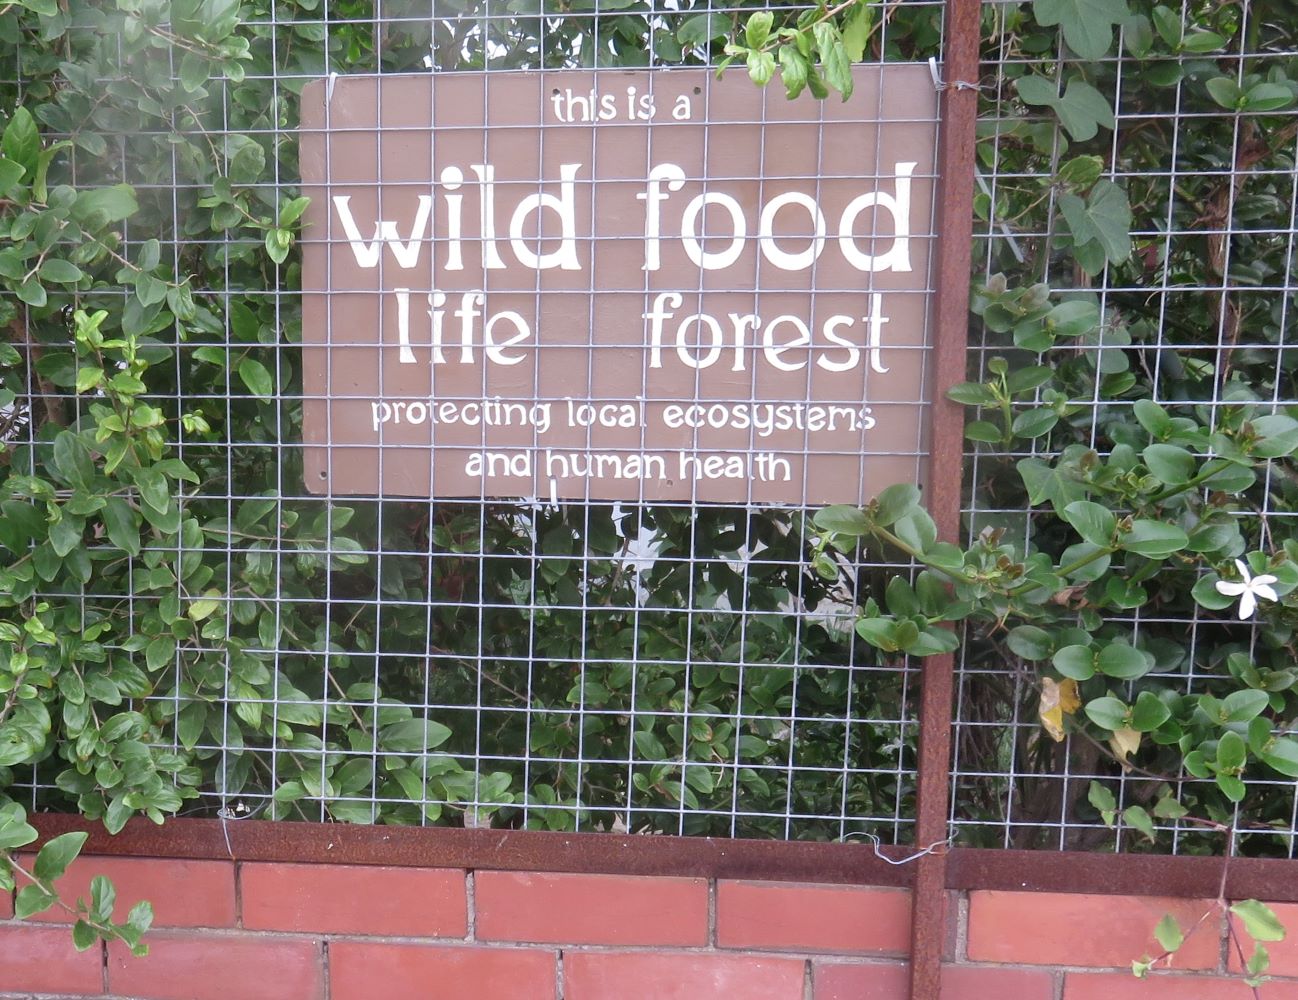 A wildlife food forest means no more war between insects and humans ! Garden for wildlife and for your own consumption using native food plants.